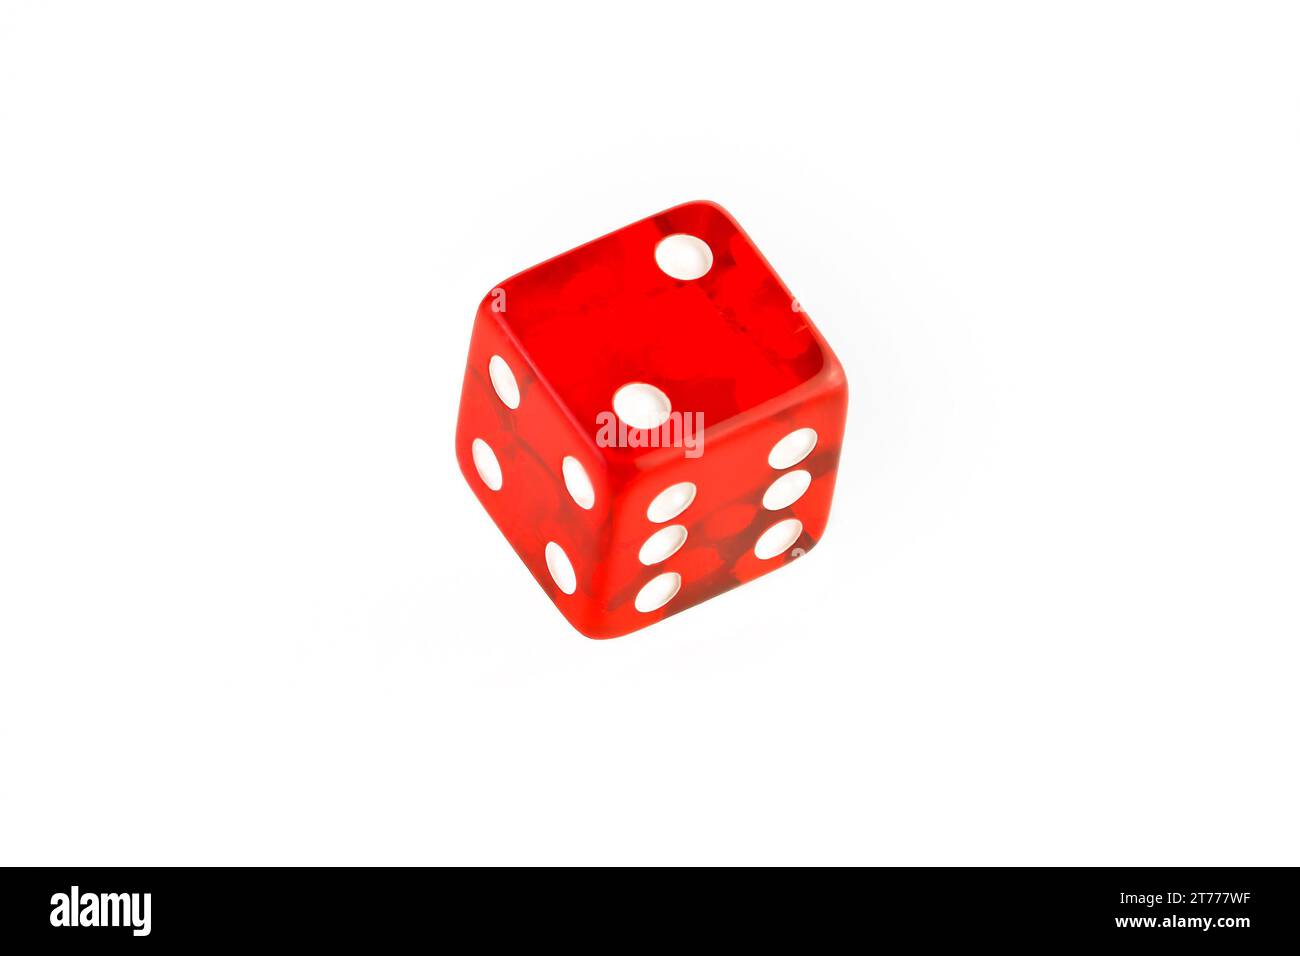 one transparent red die on a white background Stock Photo